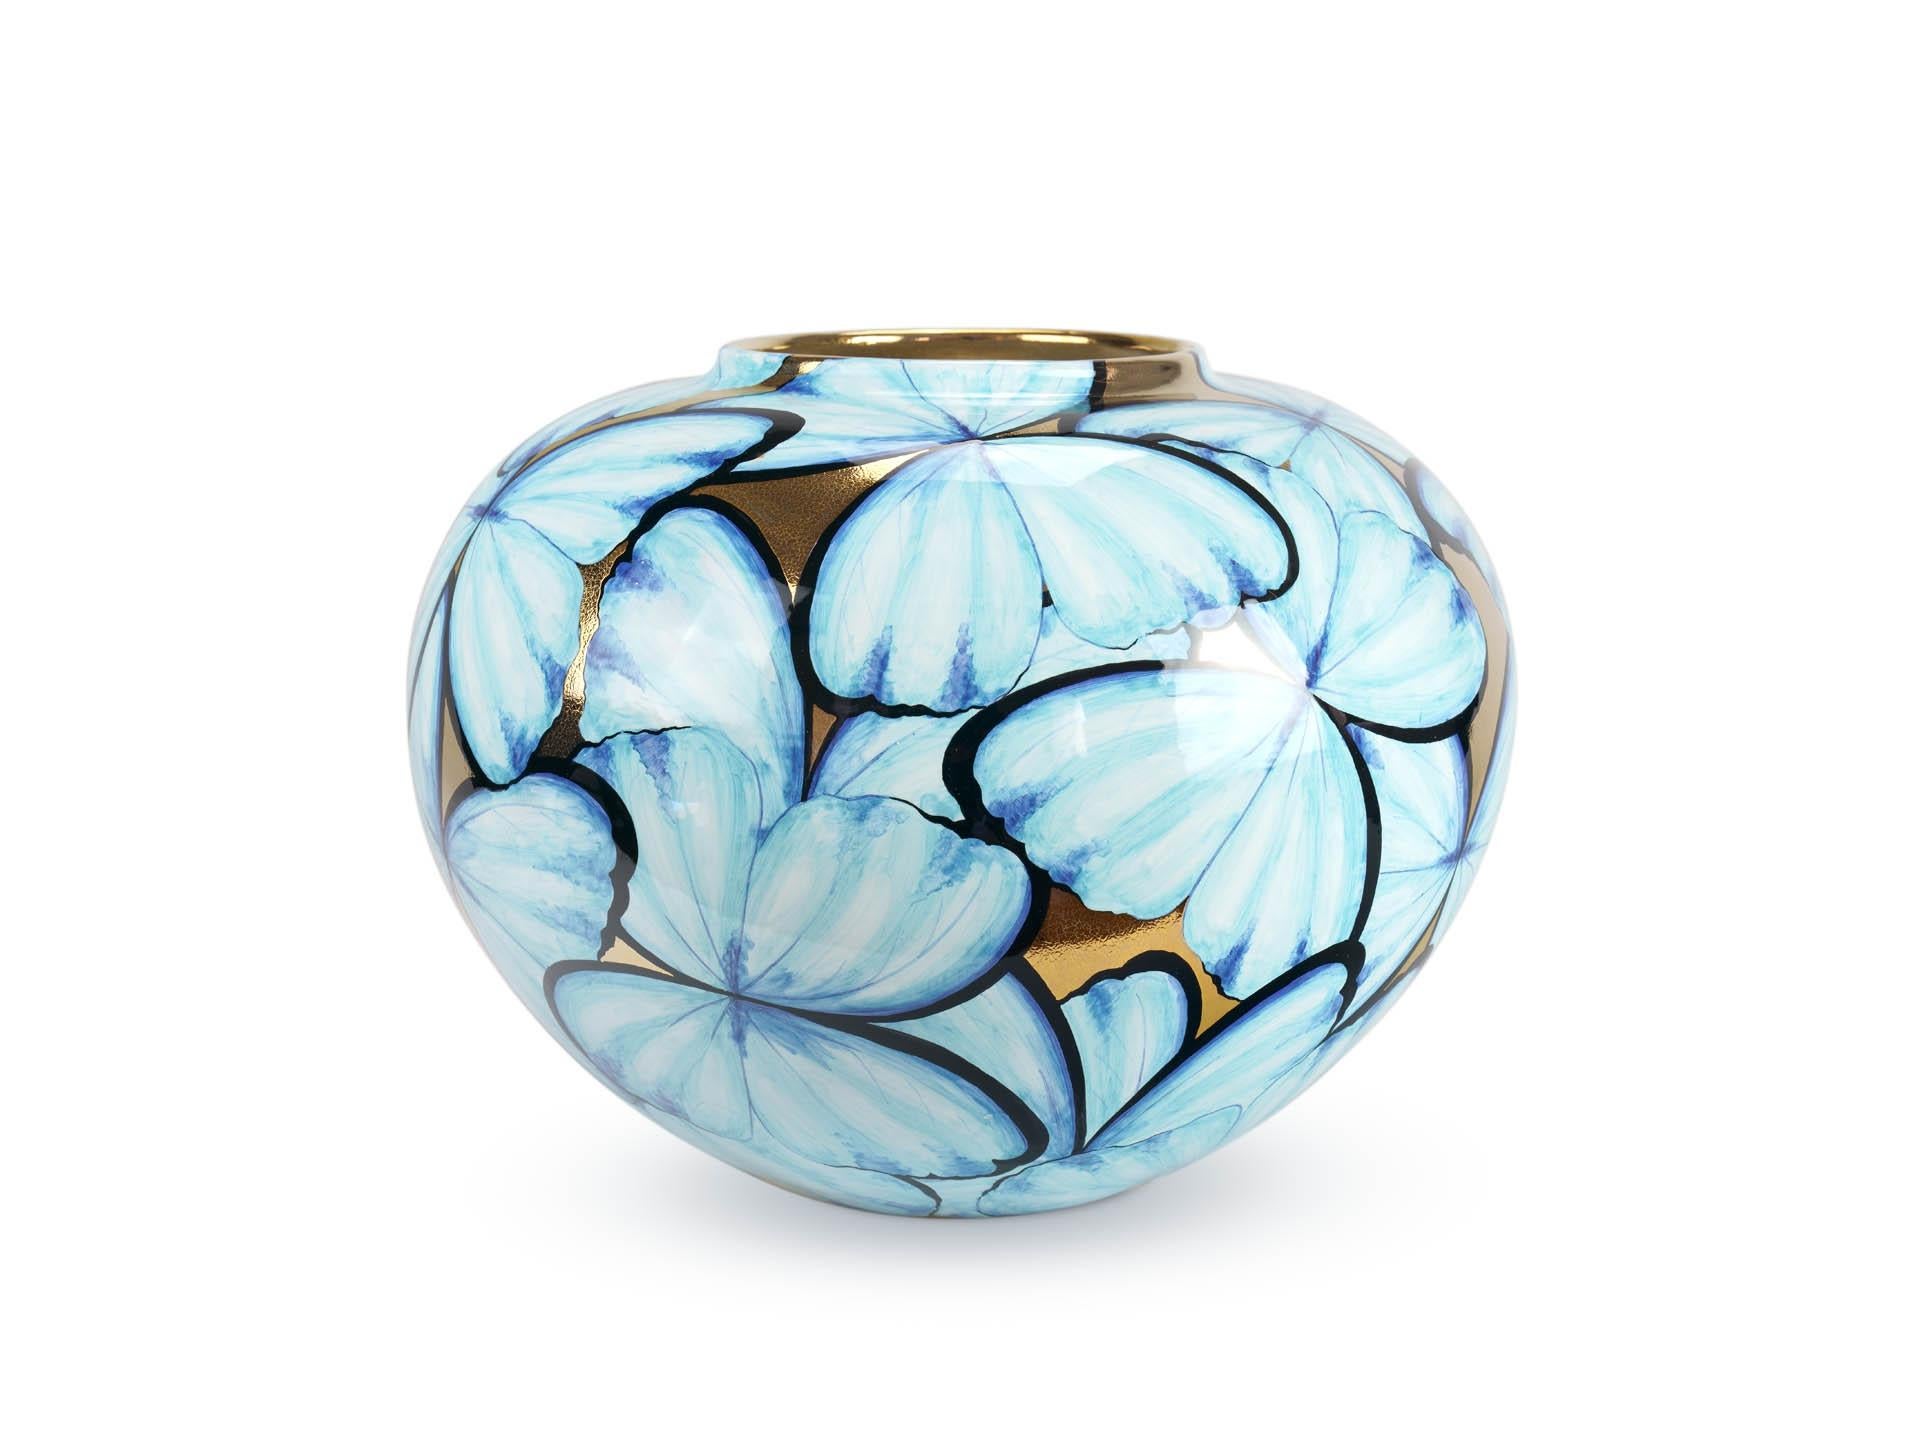 Modern Large Ceramic Vase Hand-Painted Light Blue Butterflies, 24kt Gold Luster, Italy  For Sale